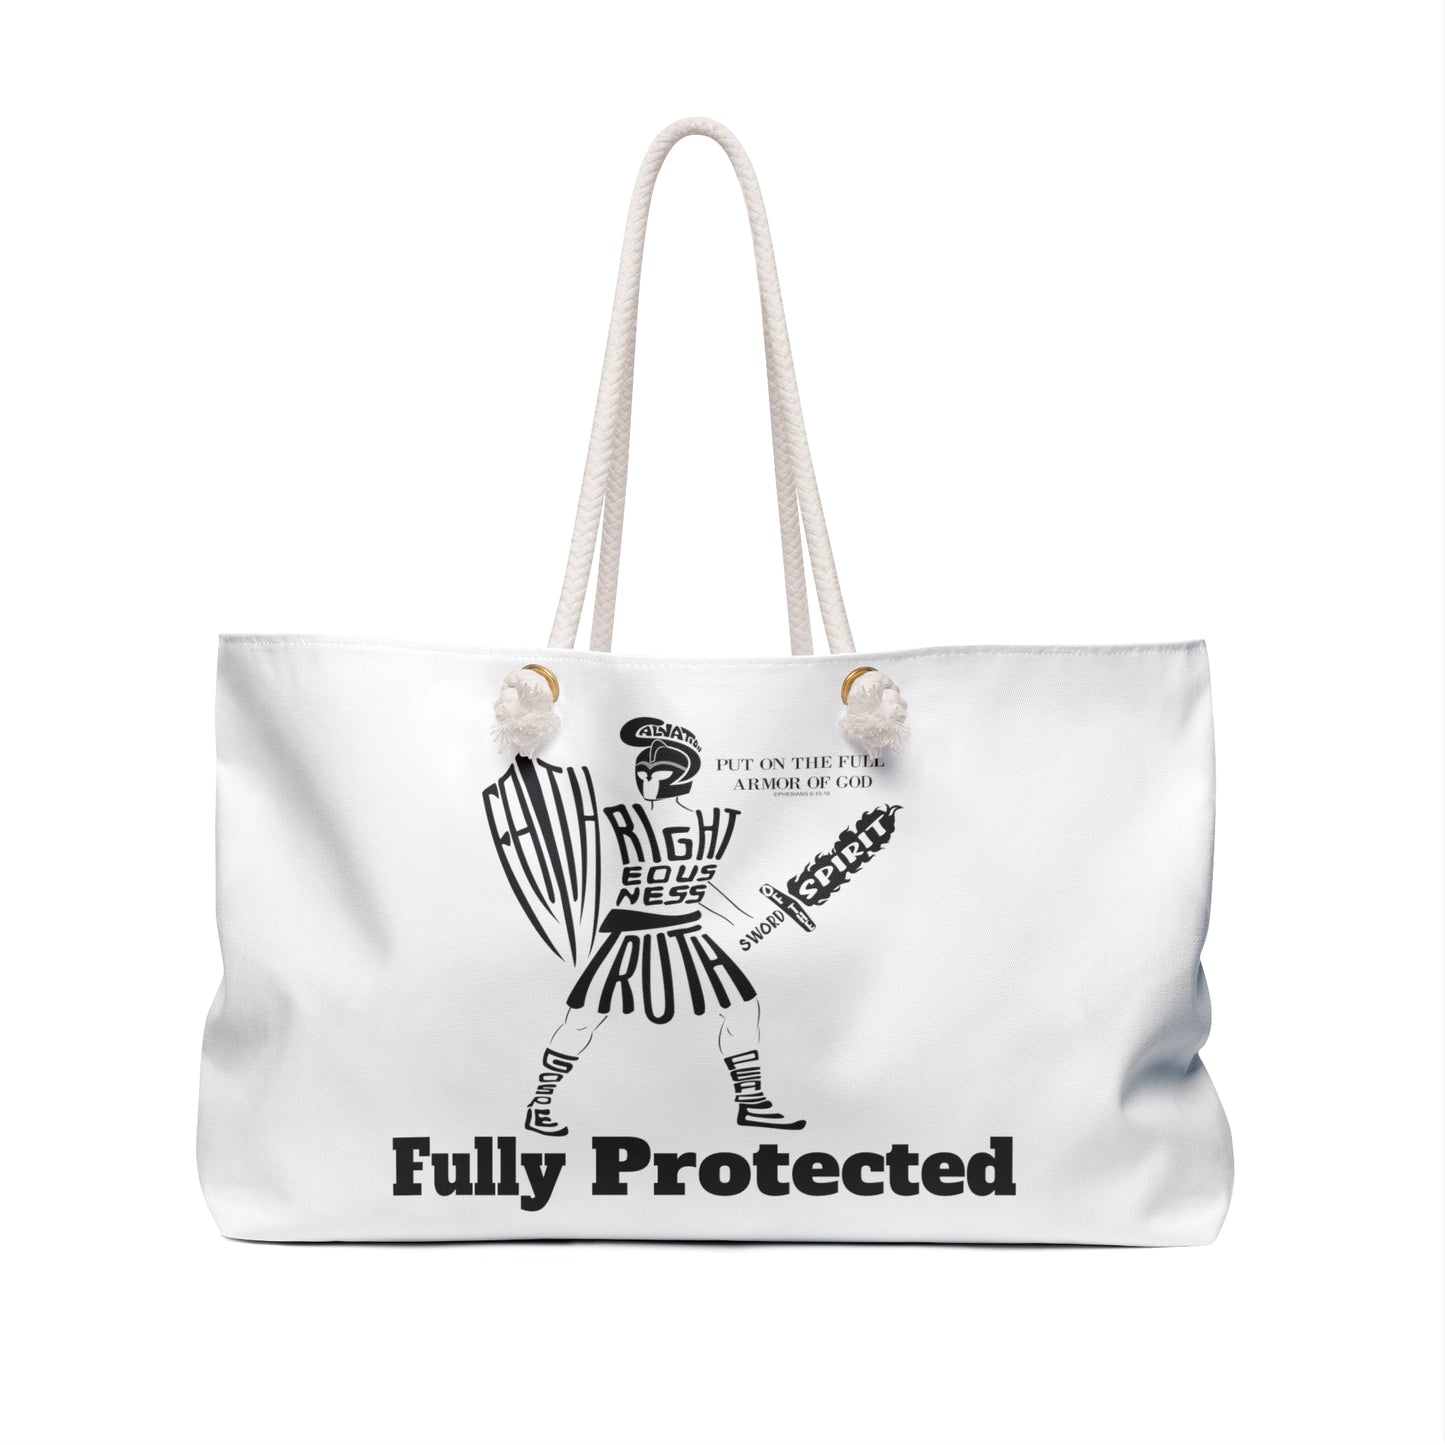 Ultimate Travel Companion Fully Protected Weekender Bag